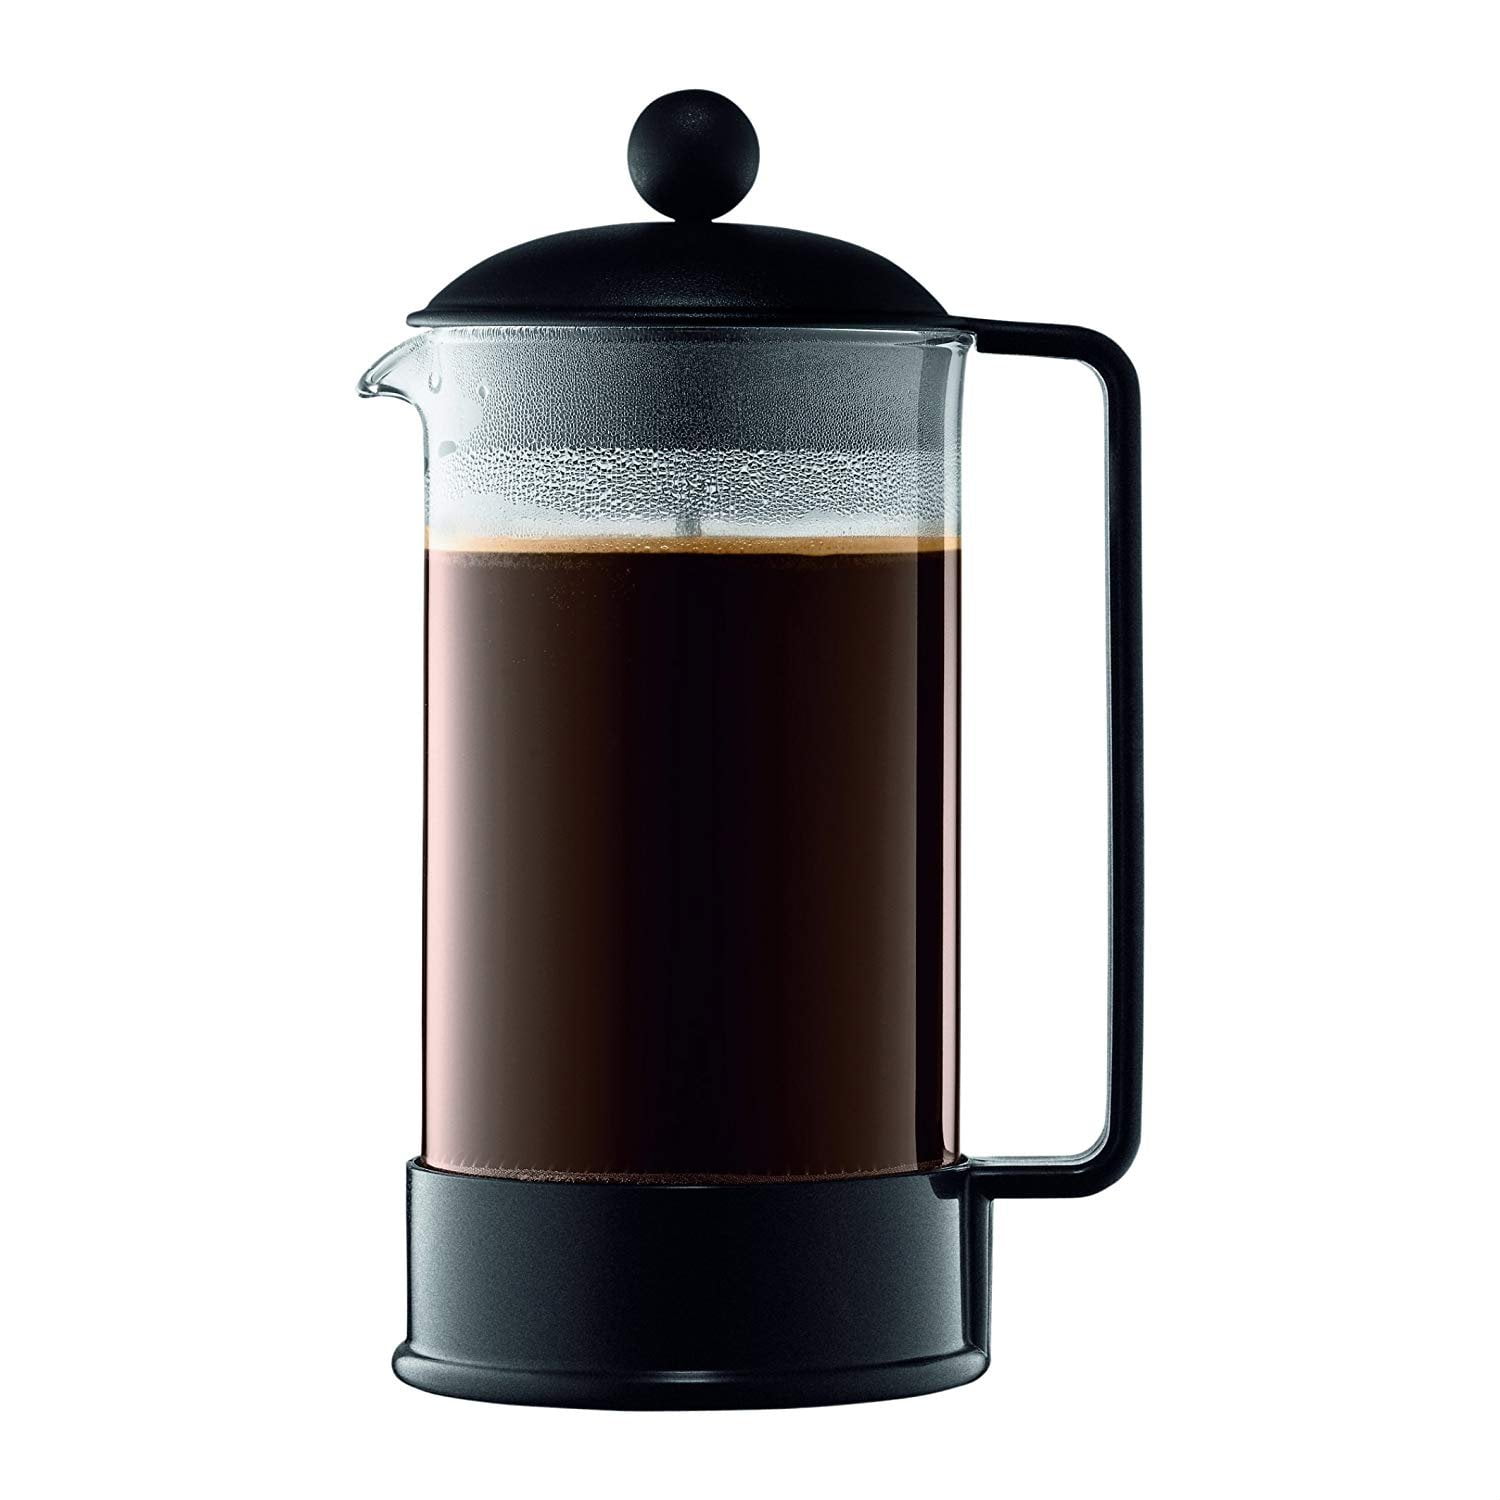 Bodum French Press 4 Cup Coffee Maker Stainless - 11055-16